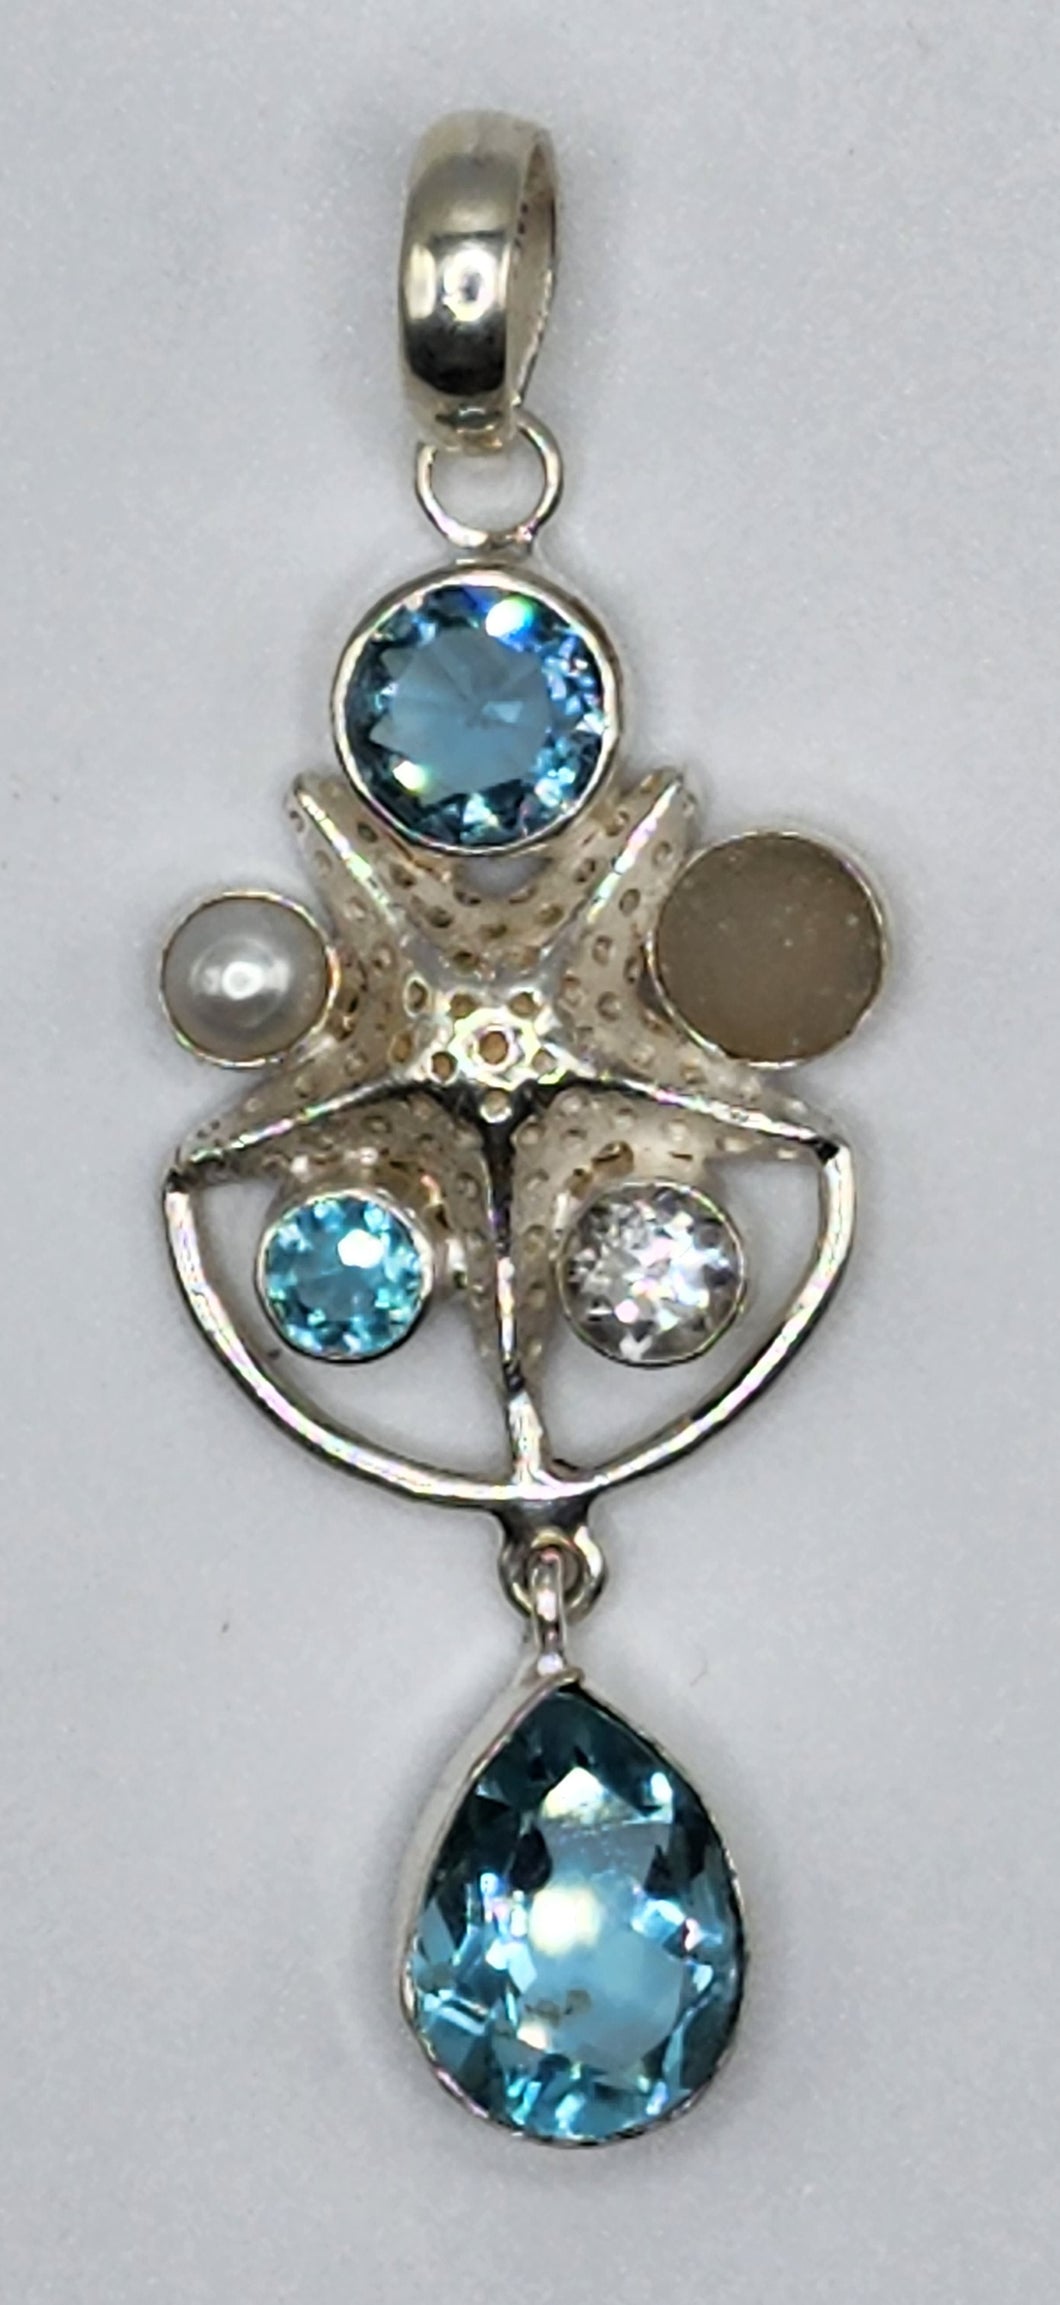 Blue Topaz Druzy Crystal Quartz and Pearl Gemstones With Silver Starfish Set in 925 Sterling Silver Pendant